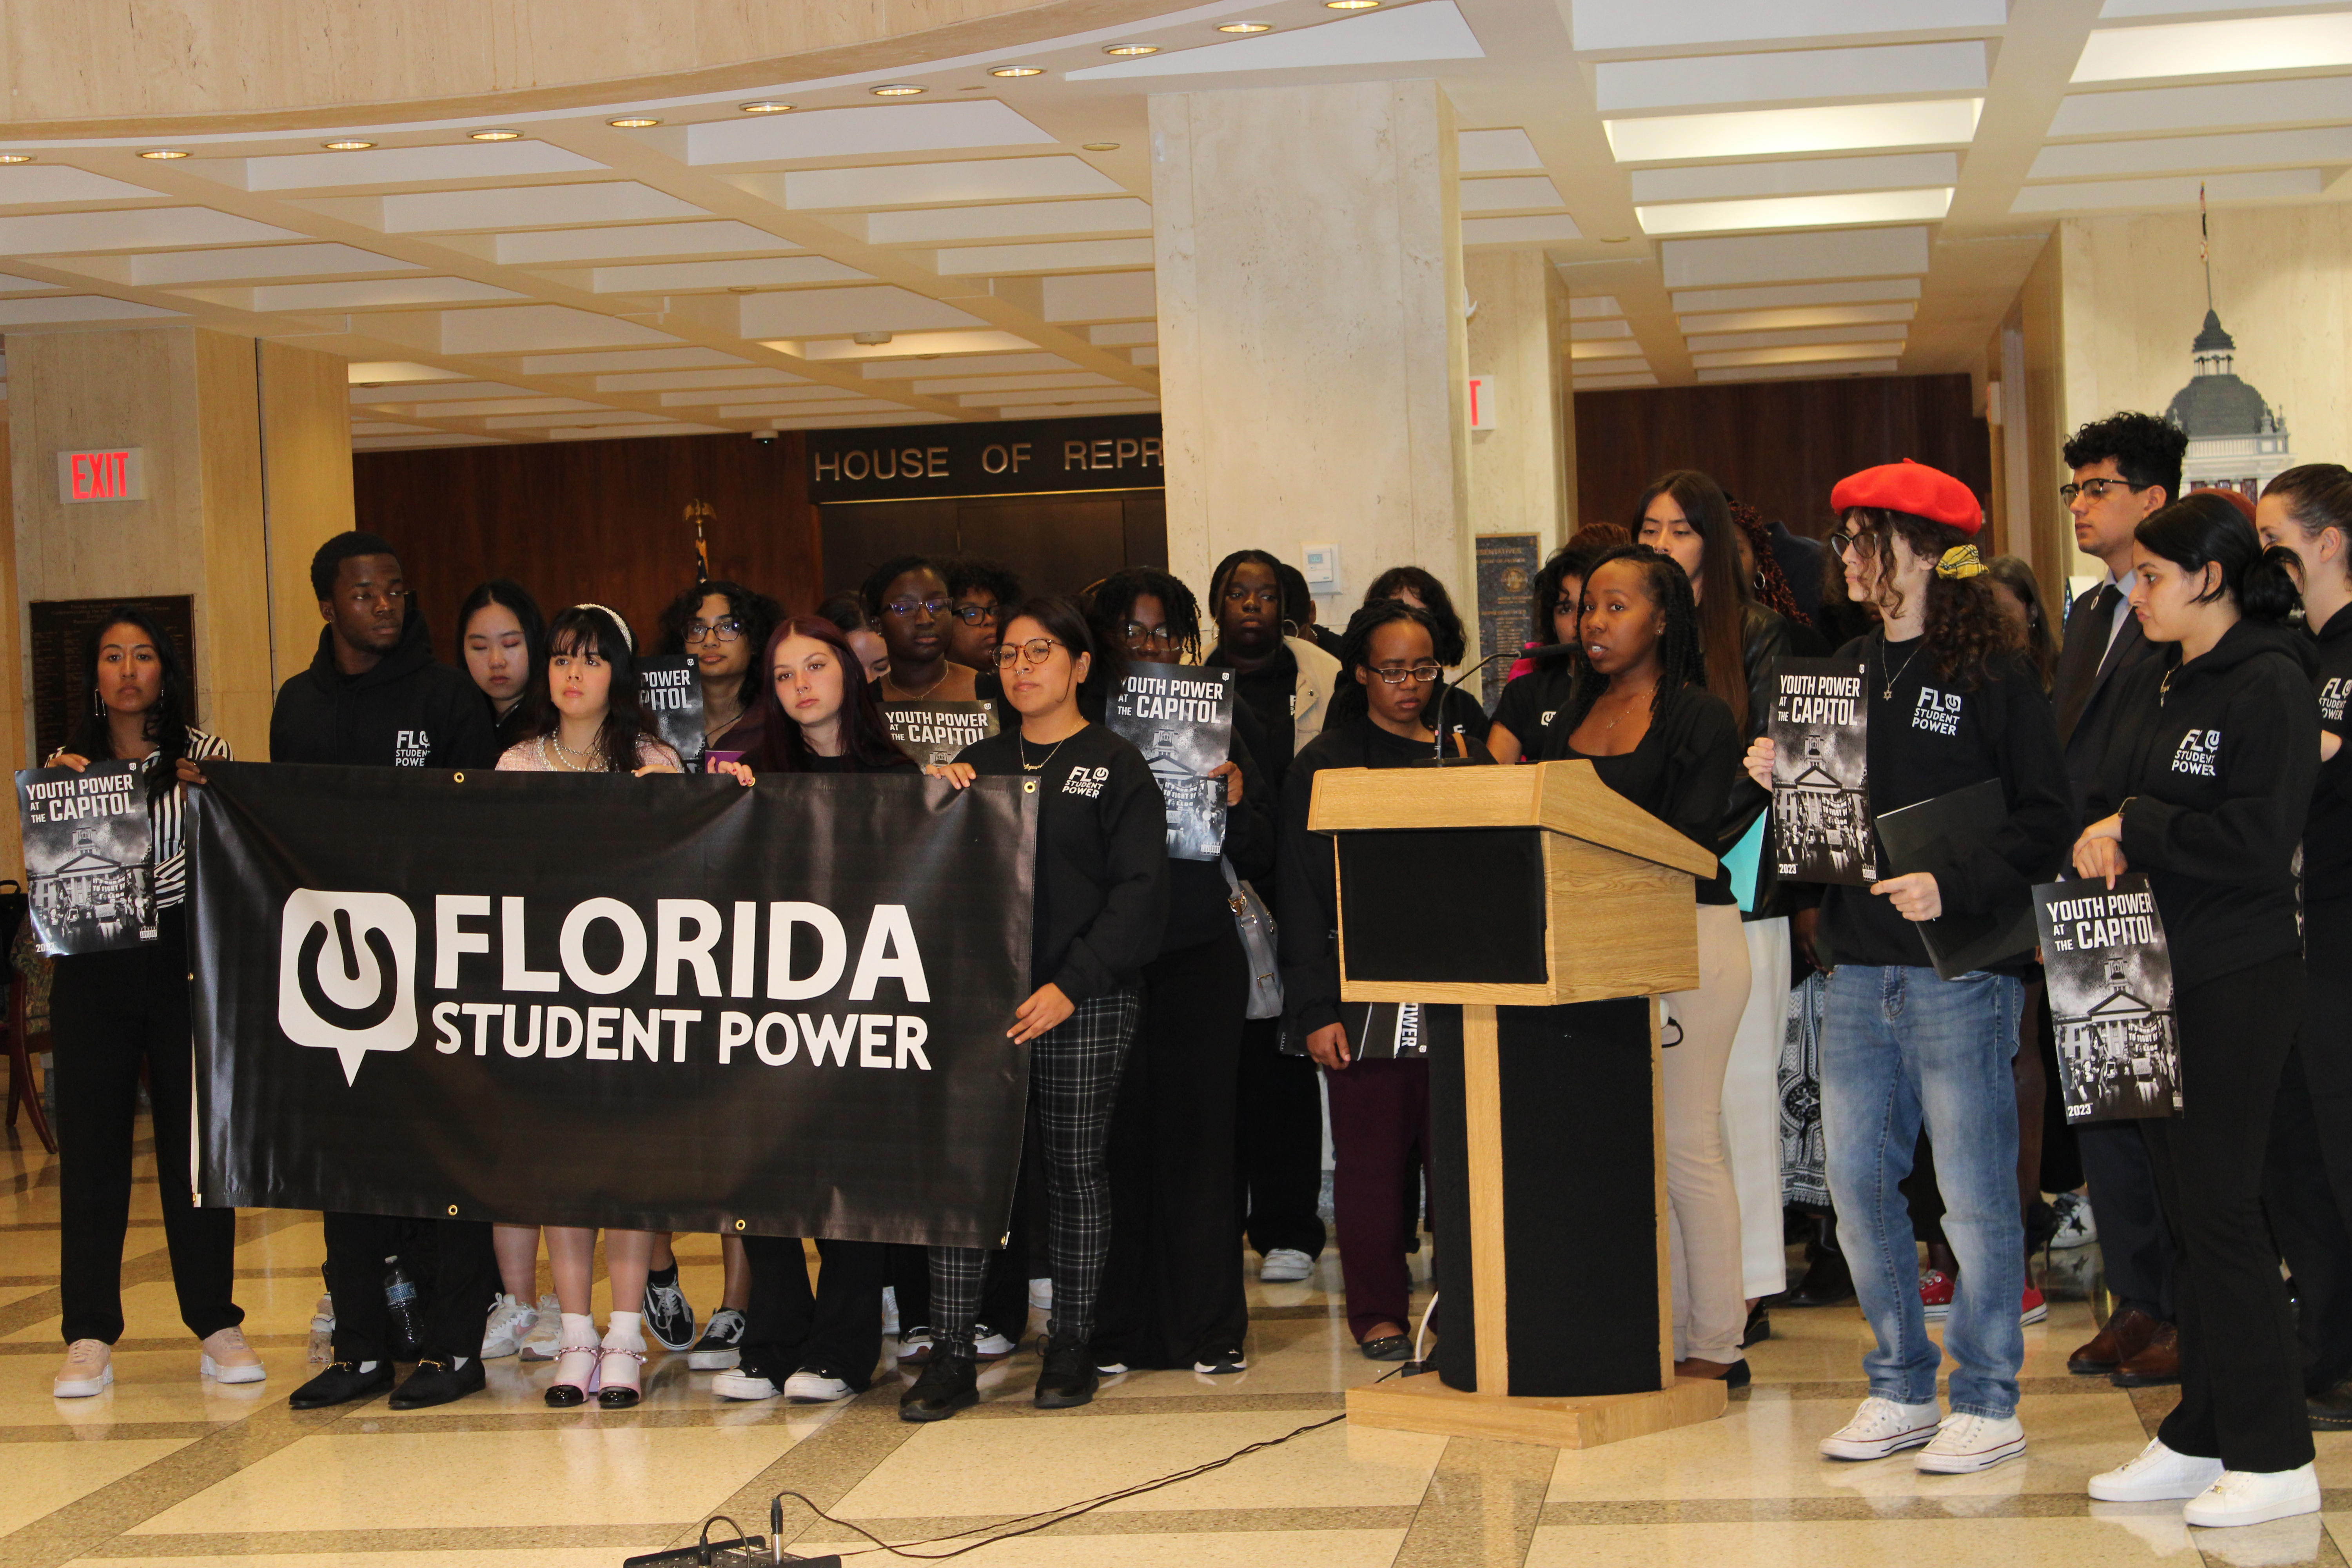 Group holds banner and signs for Florida Student Power as speaker at podium addresses open room